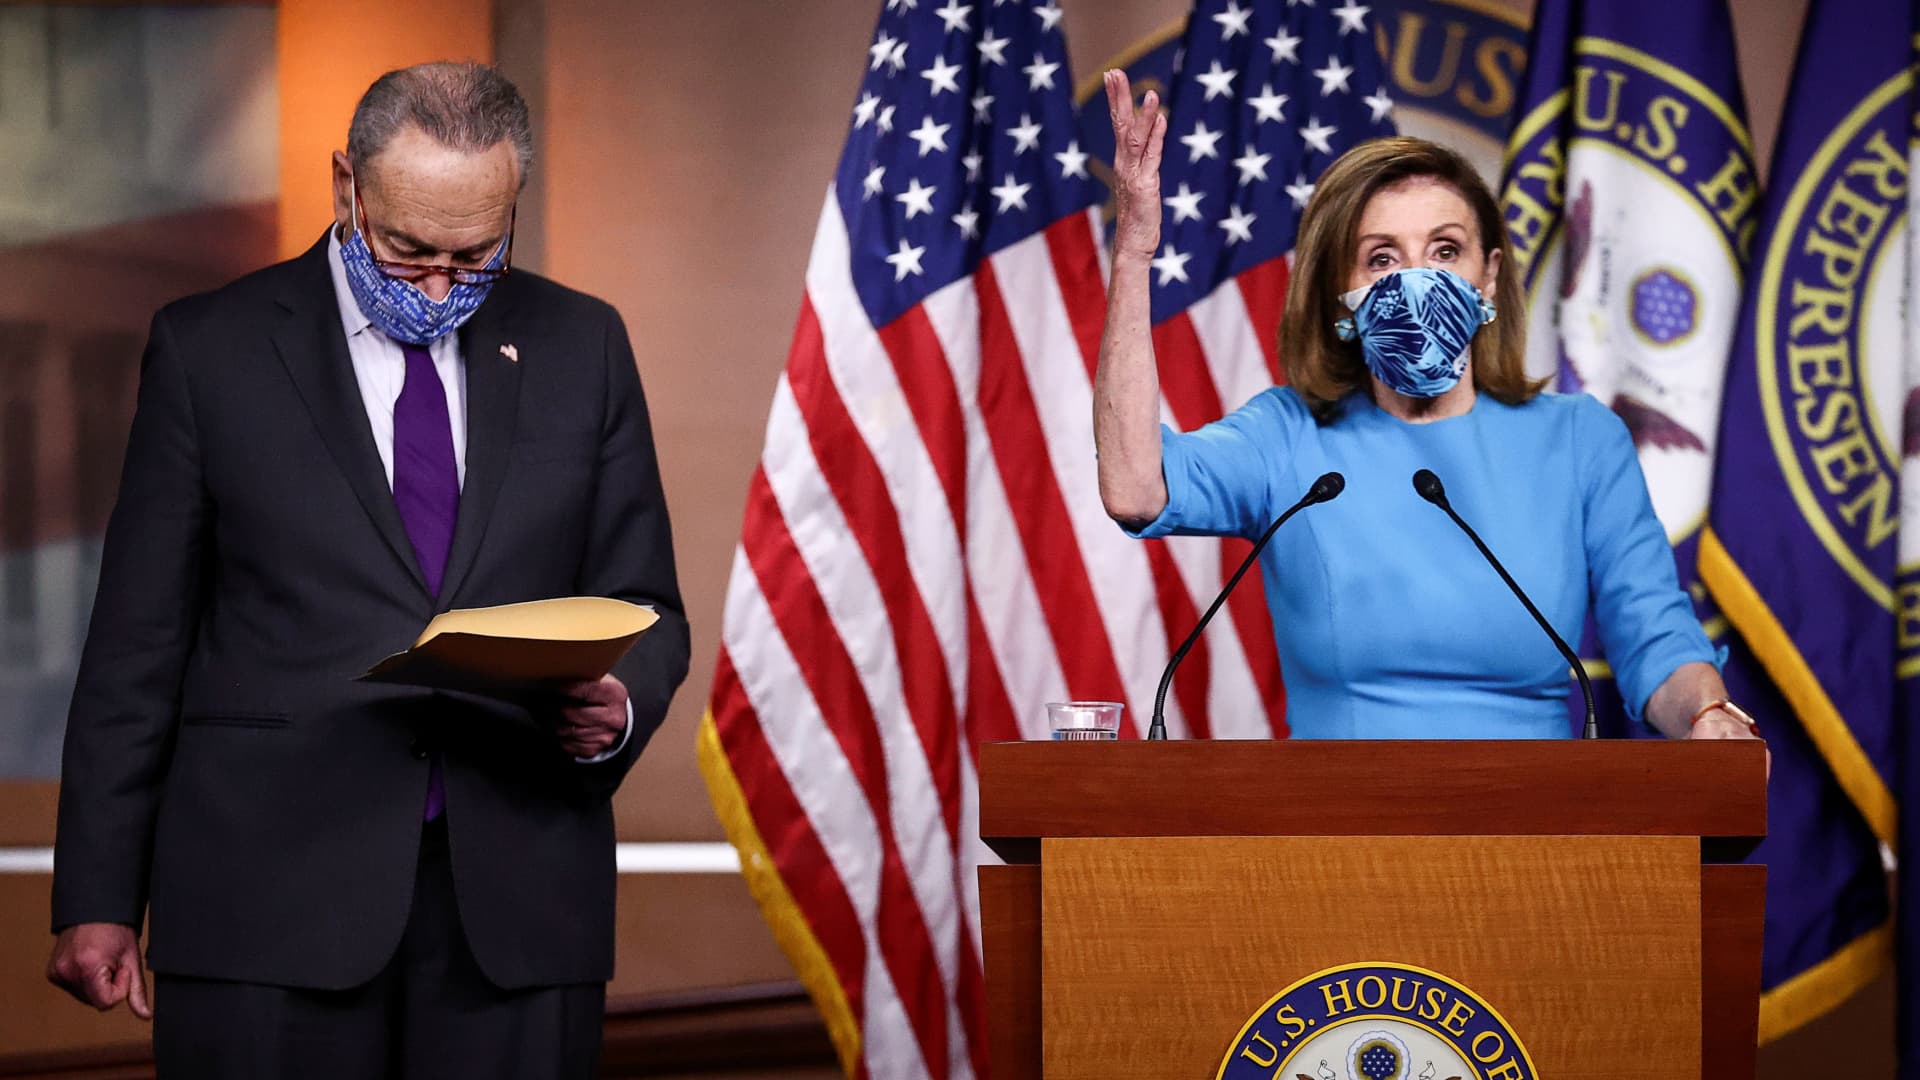 U.S. Speaker of the House of Representatives Nancy Pelosi (D-CA) and Senate Democratic Leader Chuck Schumer (D-NY) speak to reporters about the 2020 U.S. presidential election results and the continuing coronavirus disease (COVID-19) pandemic during a news conference at the U.S.Capitol in Washington, U.S., November 12, 2020.